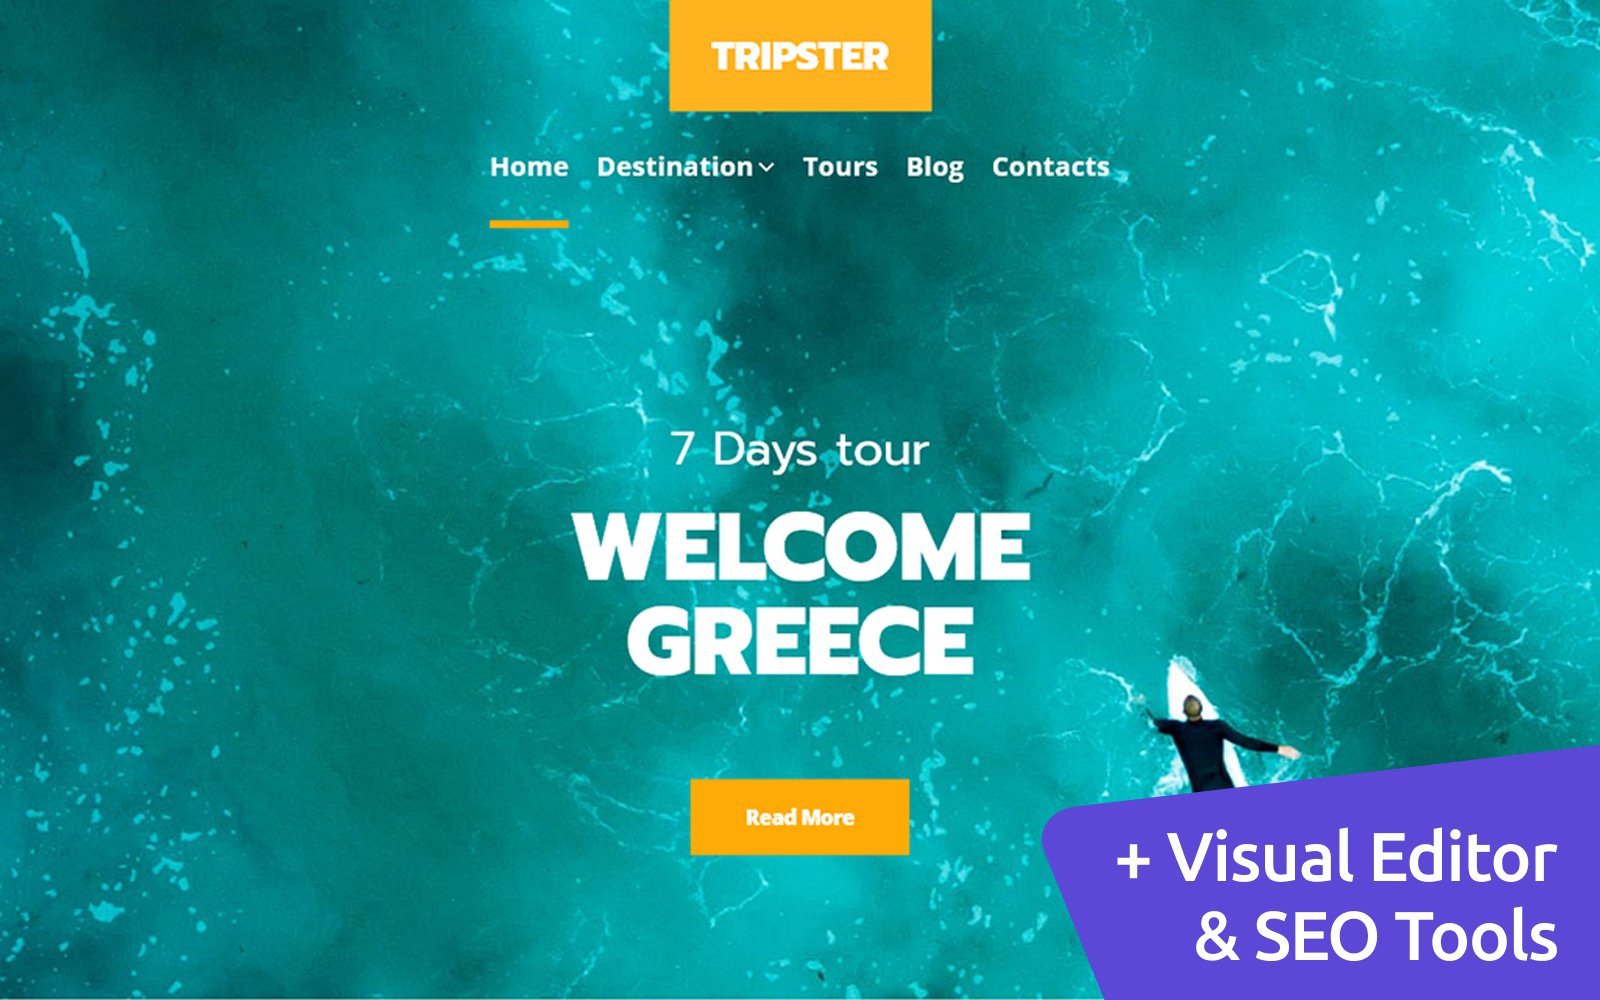 Template #196744 Travel Agency Webdesign Template - Logo template Preview